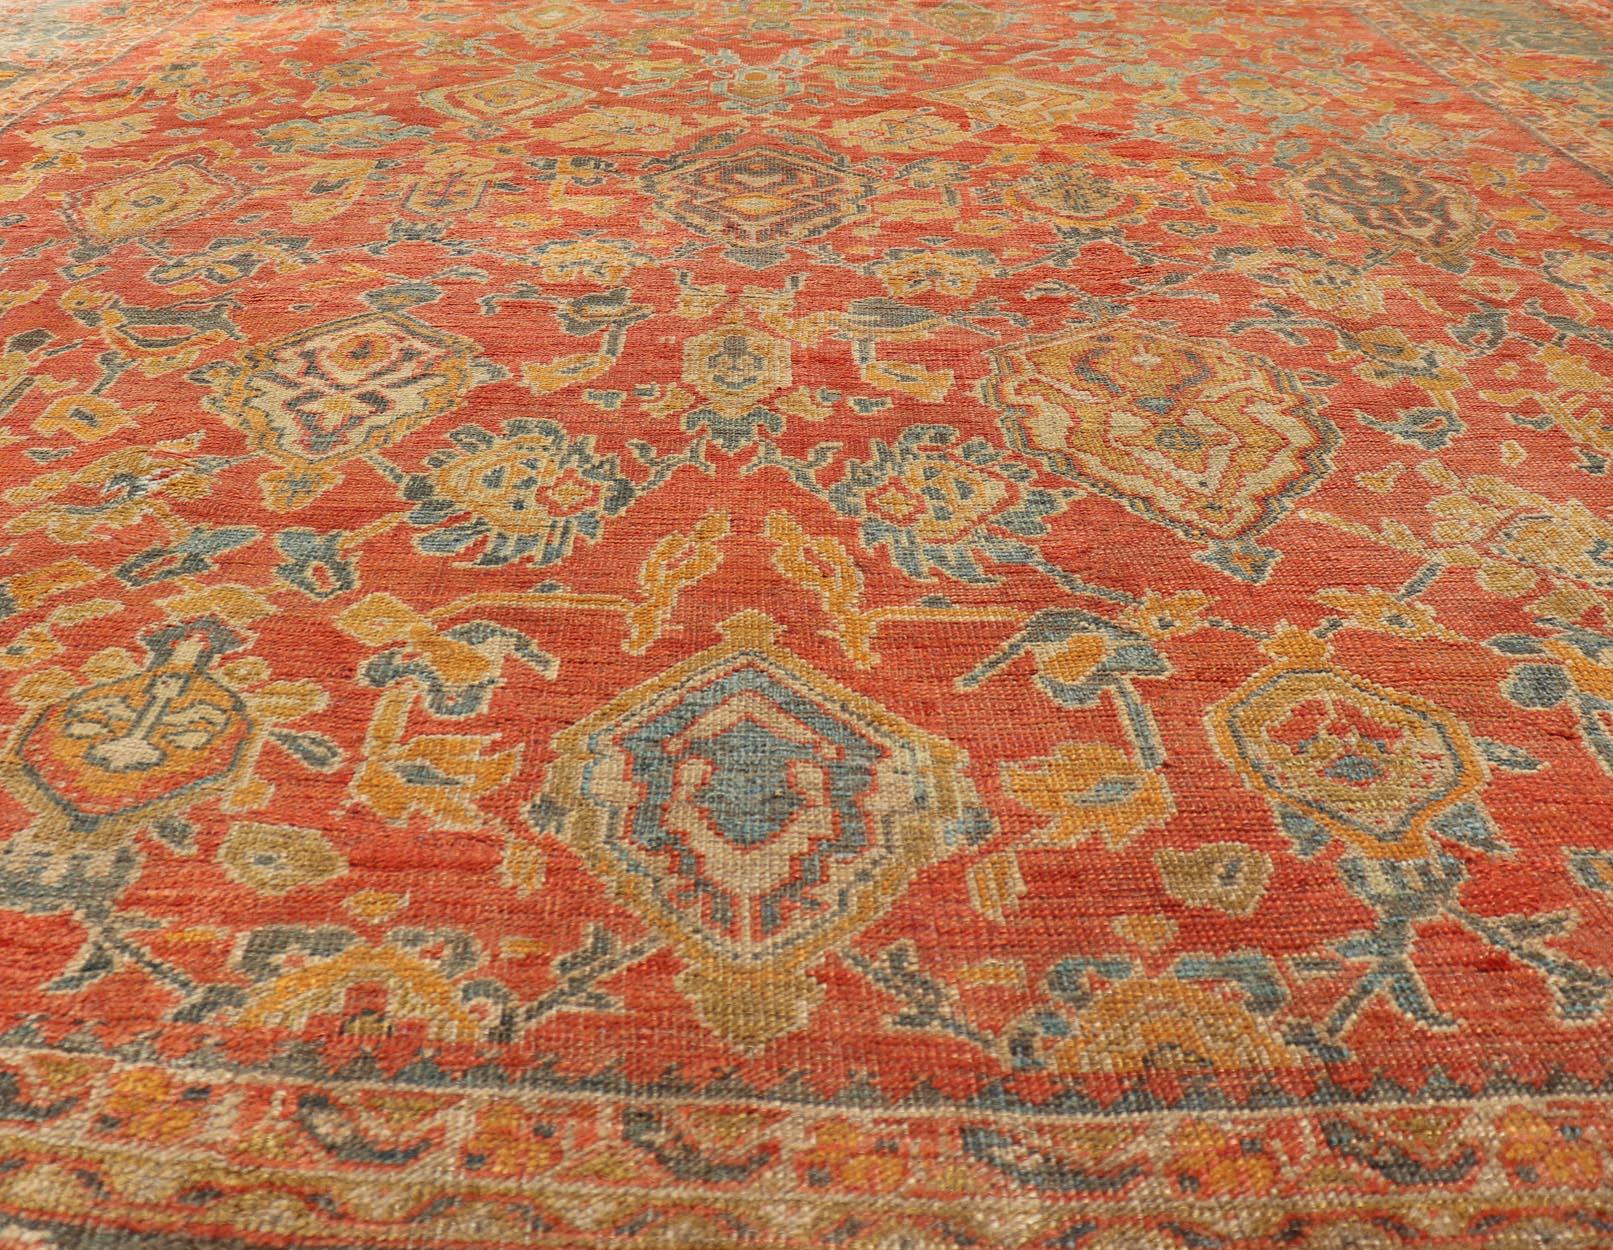 Antique Turkish Oushak Rug in Terracotta With All-Over Flower, Leaves and Vines. Keivan Woven Arts / rug M14-0401, country of origin / type: Turkey / Oushak, circa late 19th century

Measures: 12'1 x 14'4.

Variation of orange/terracotta and soft